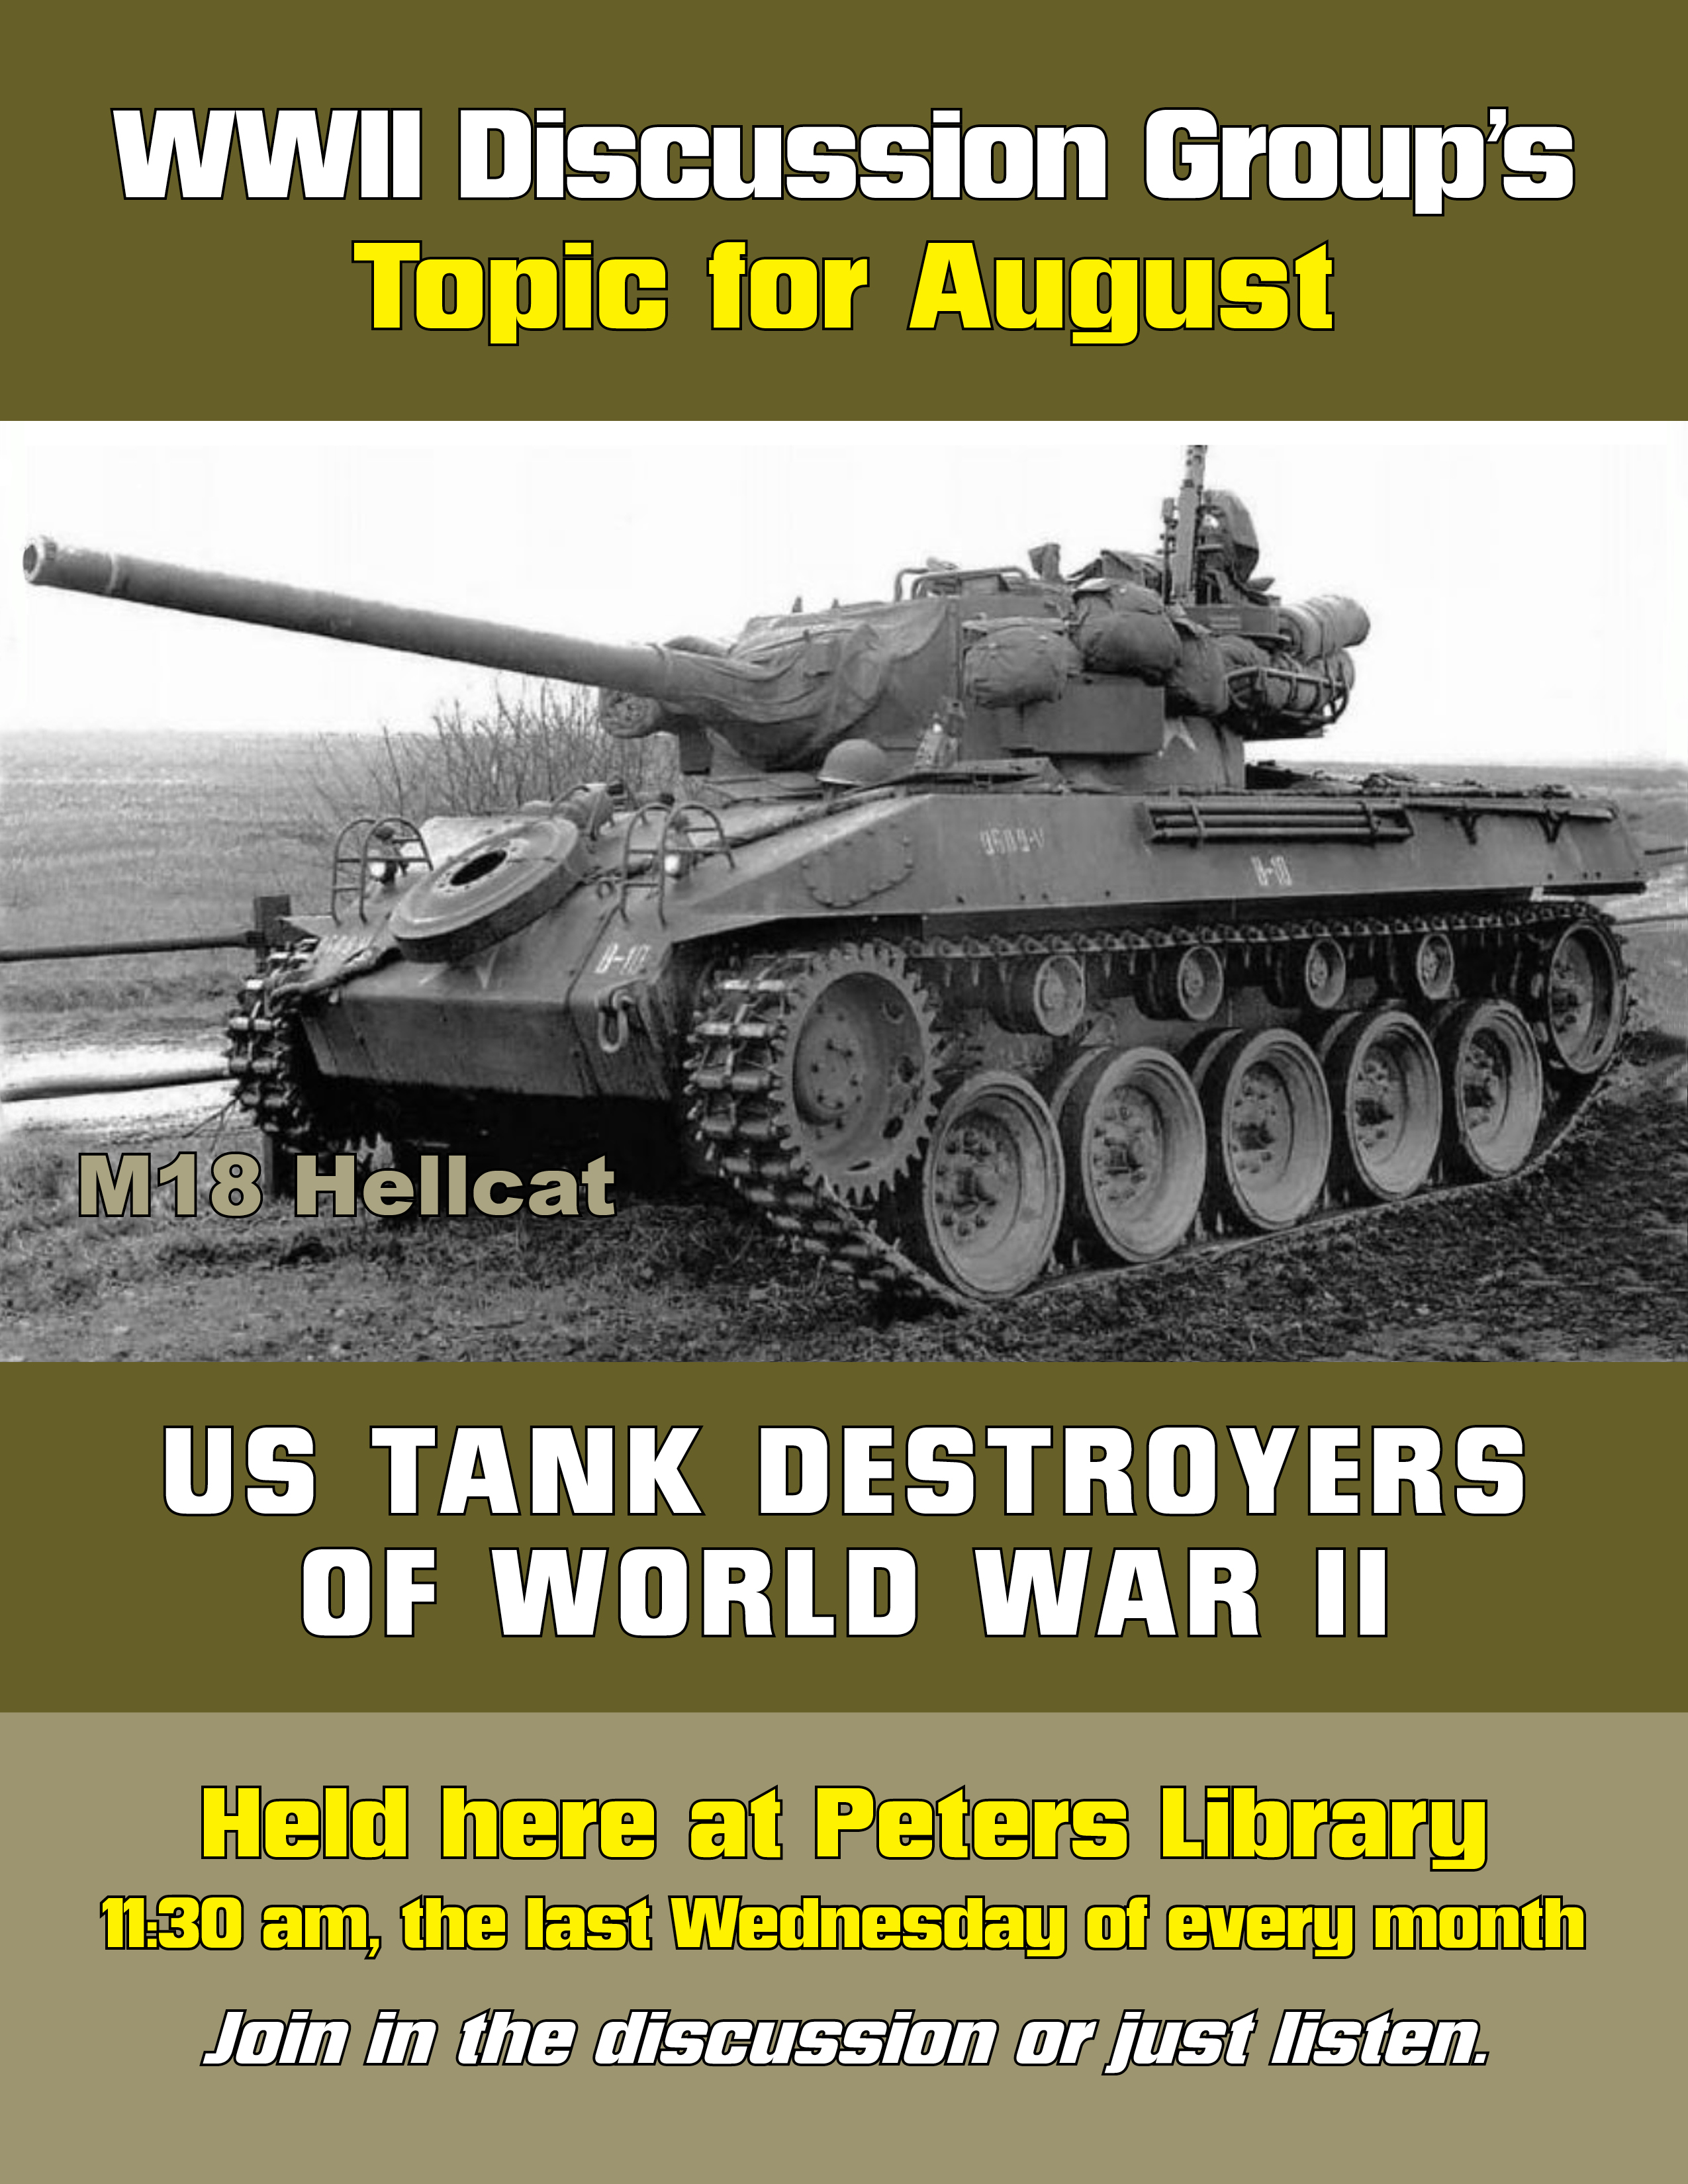 WWII Discussion Group Everybody Welcome August's Discussion Topic US Tank Destroyers of WWII - Image of a M18 Hellcat tank